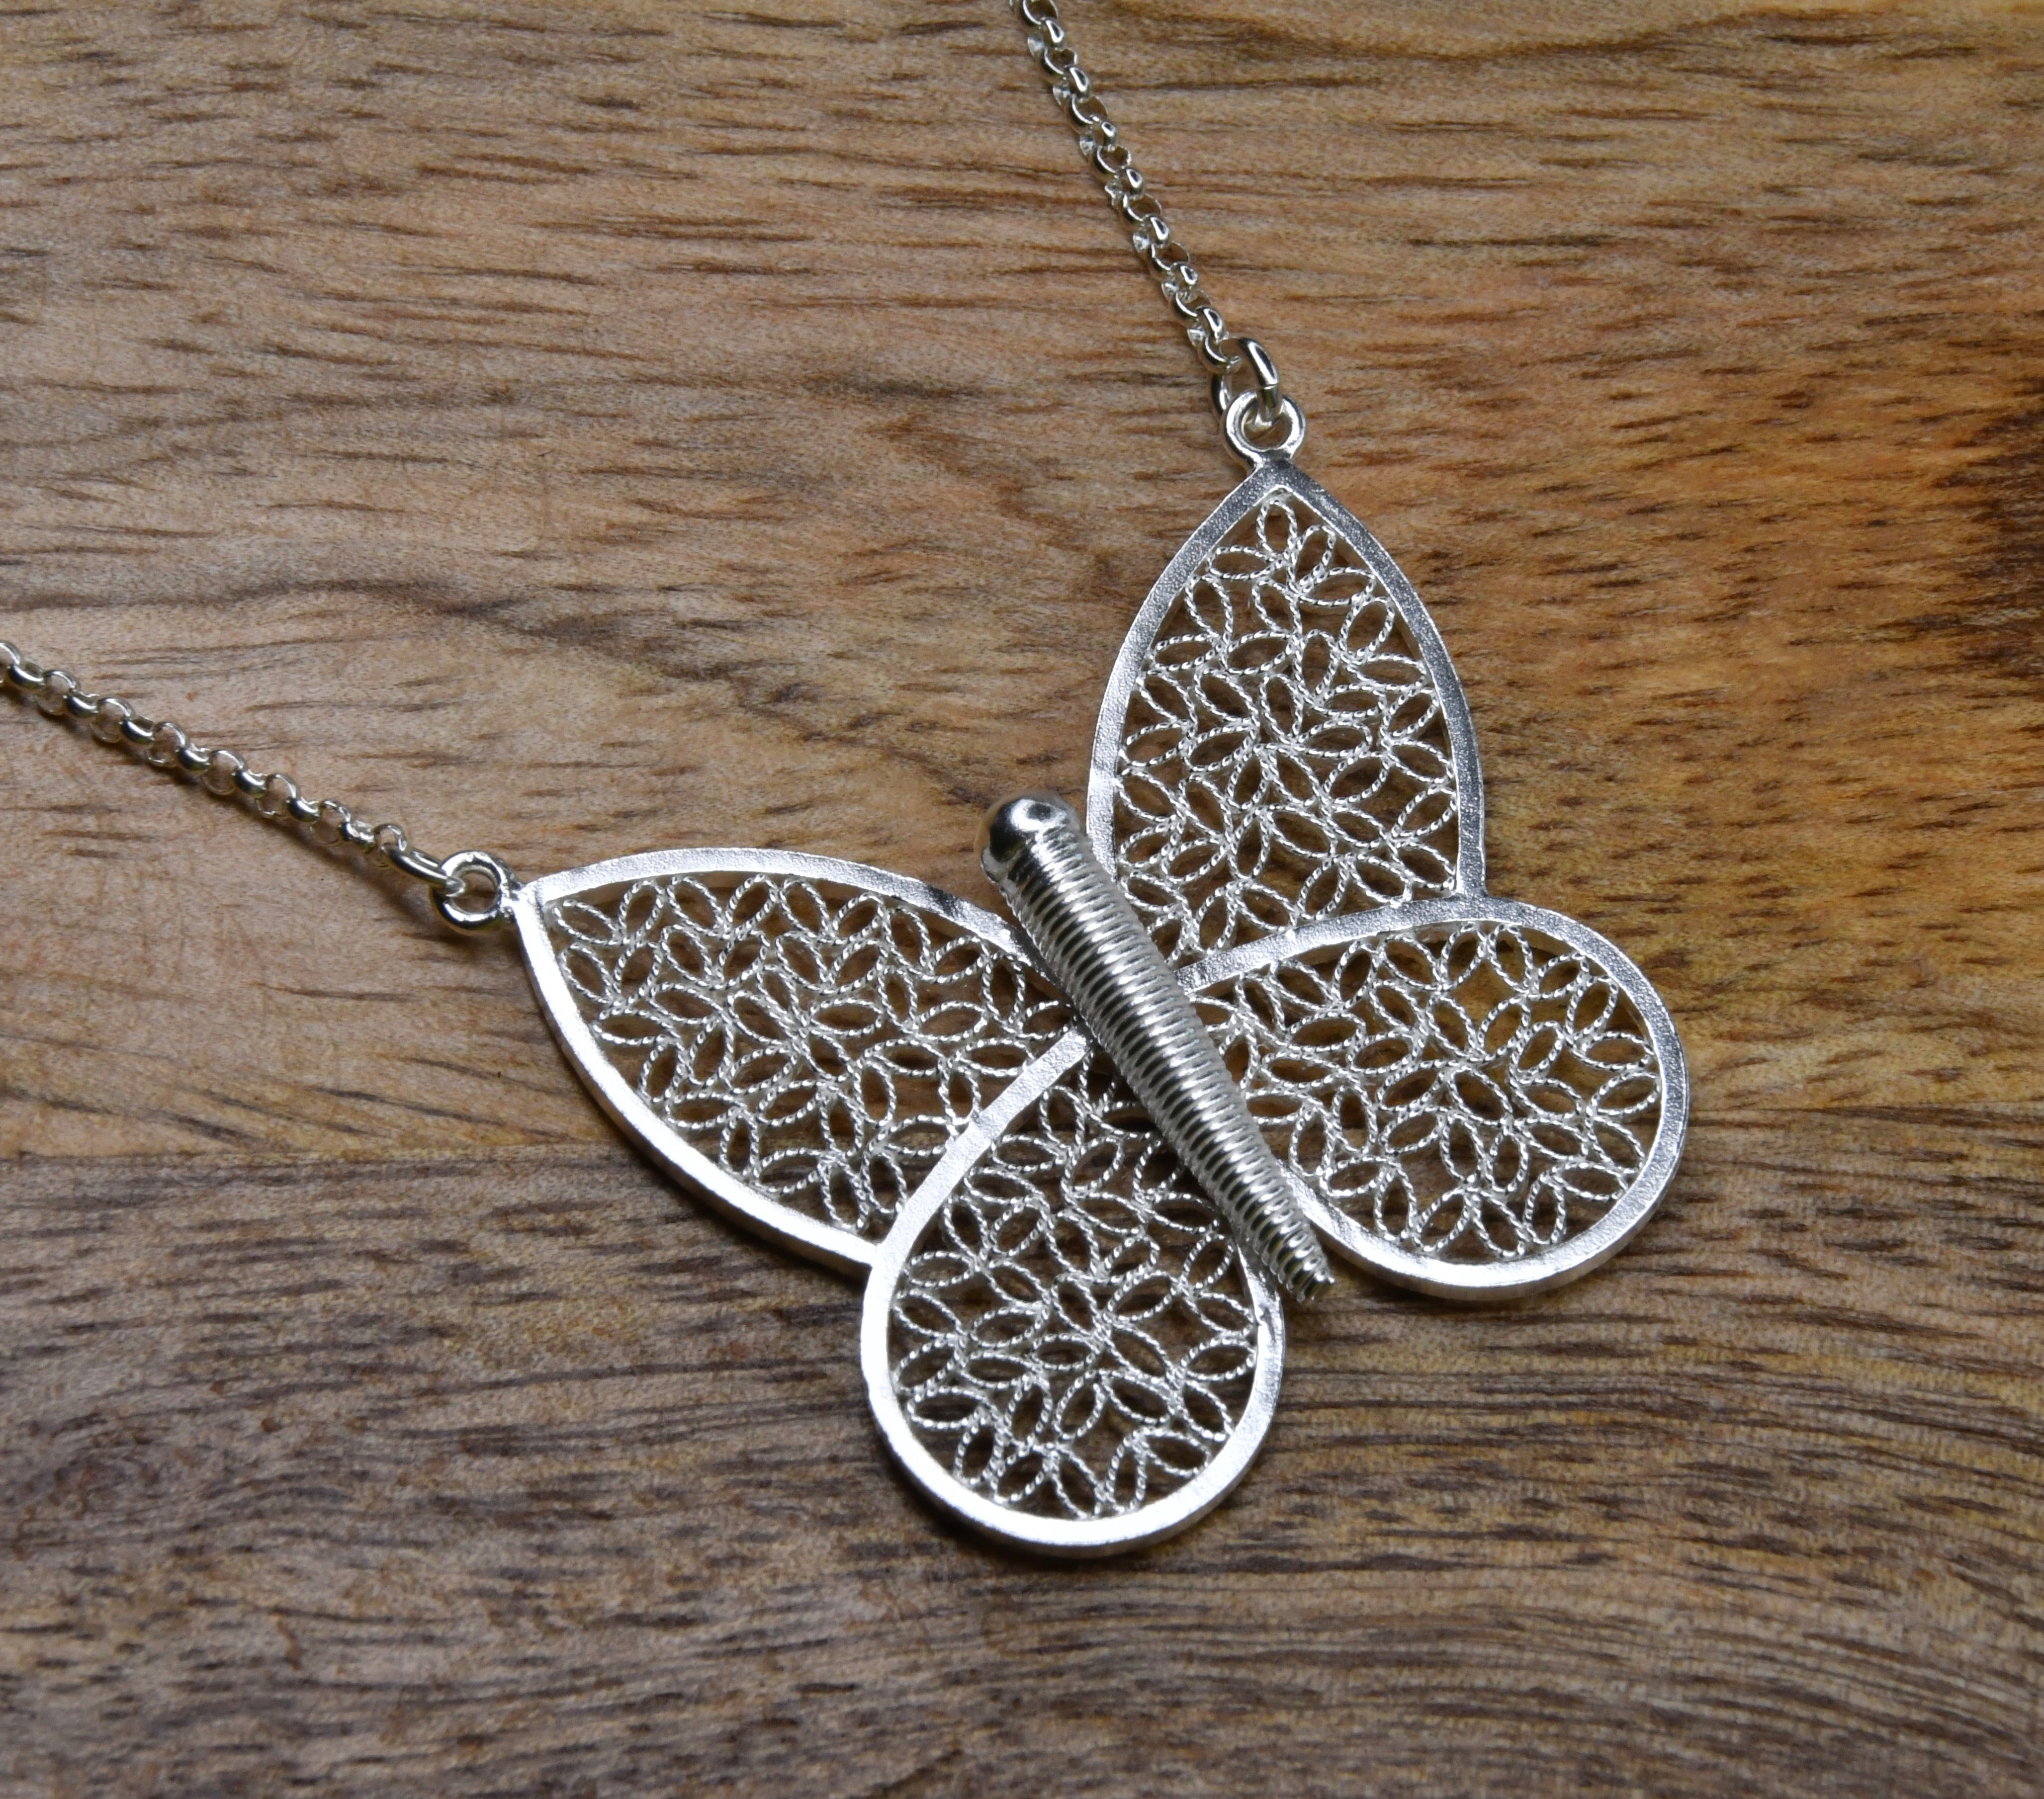 BUTTERFLY IN GOLD NECKLACE FILIGREE